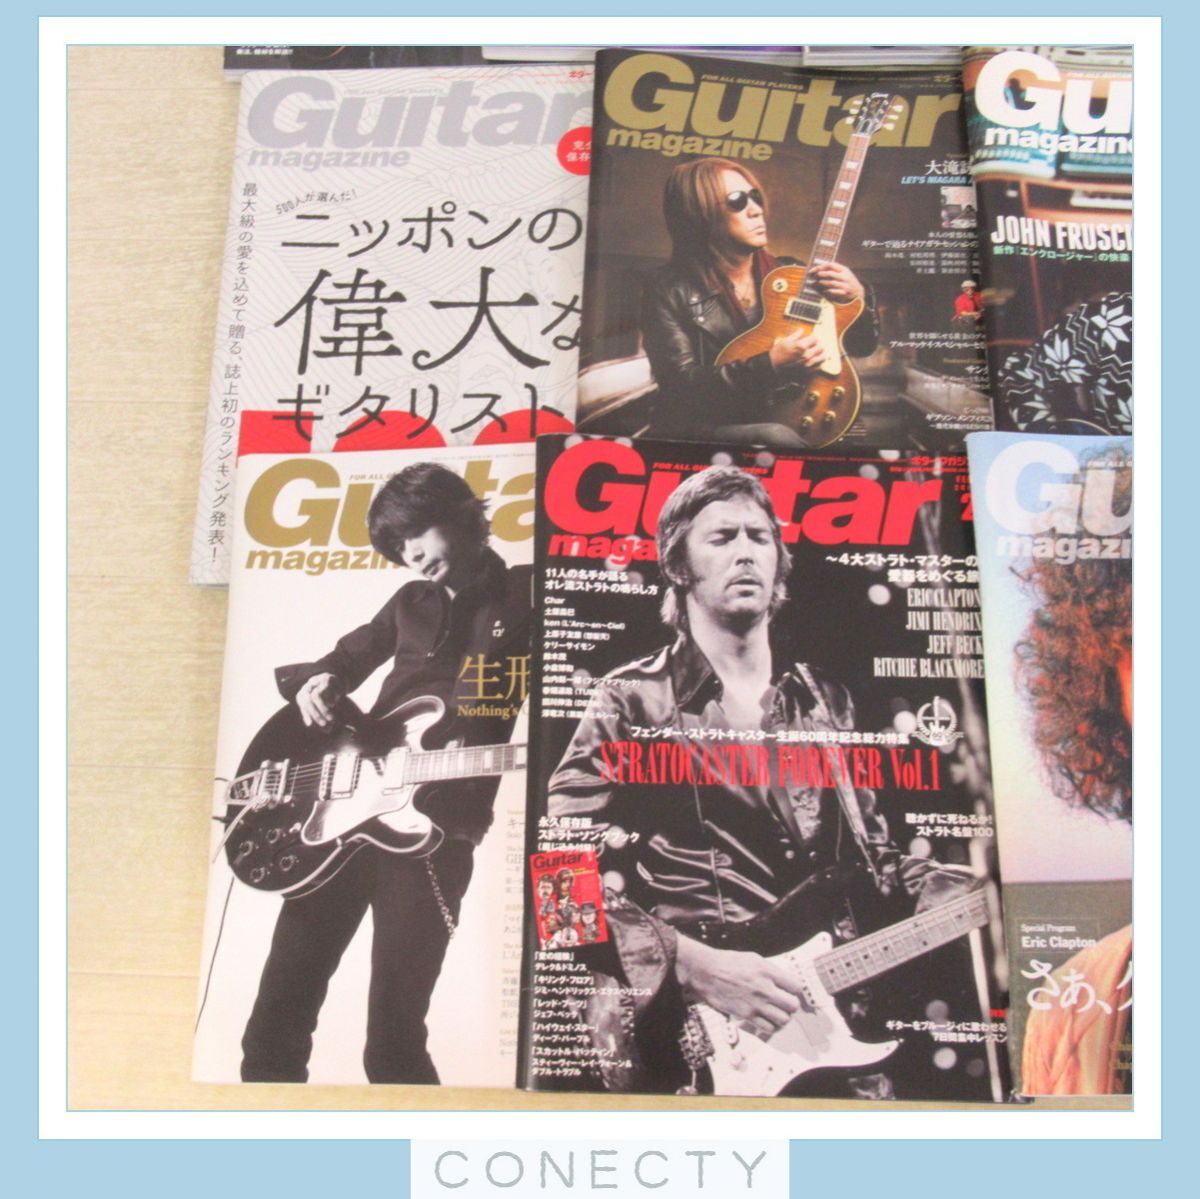 YOUNG GUITAR ヤング・ギター/Guitar magazine ギター・マガジン まとめてセット【A2【S3の画像4